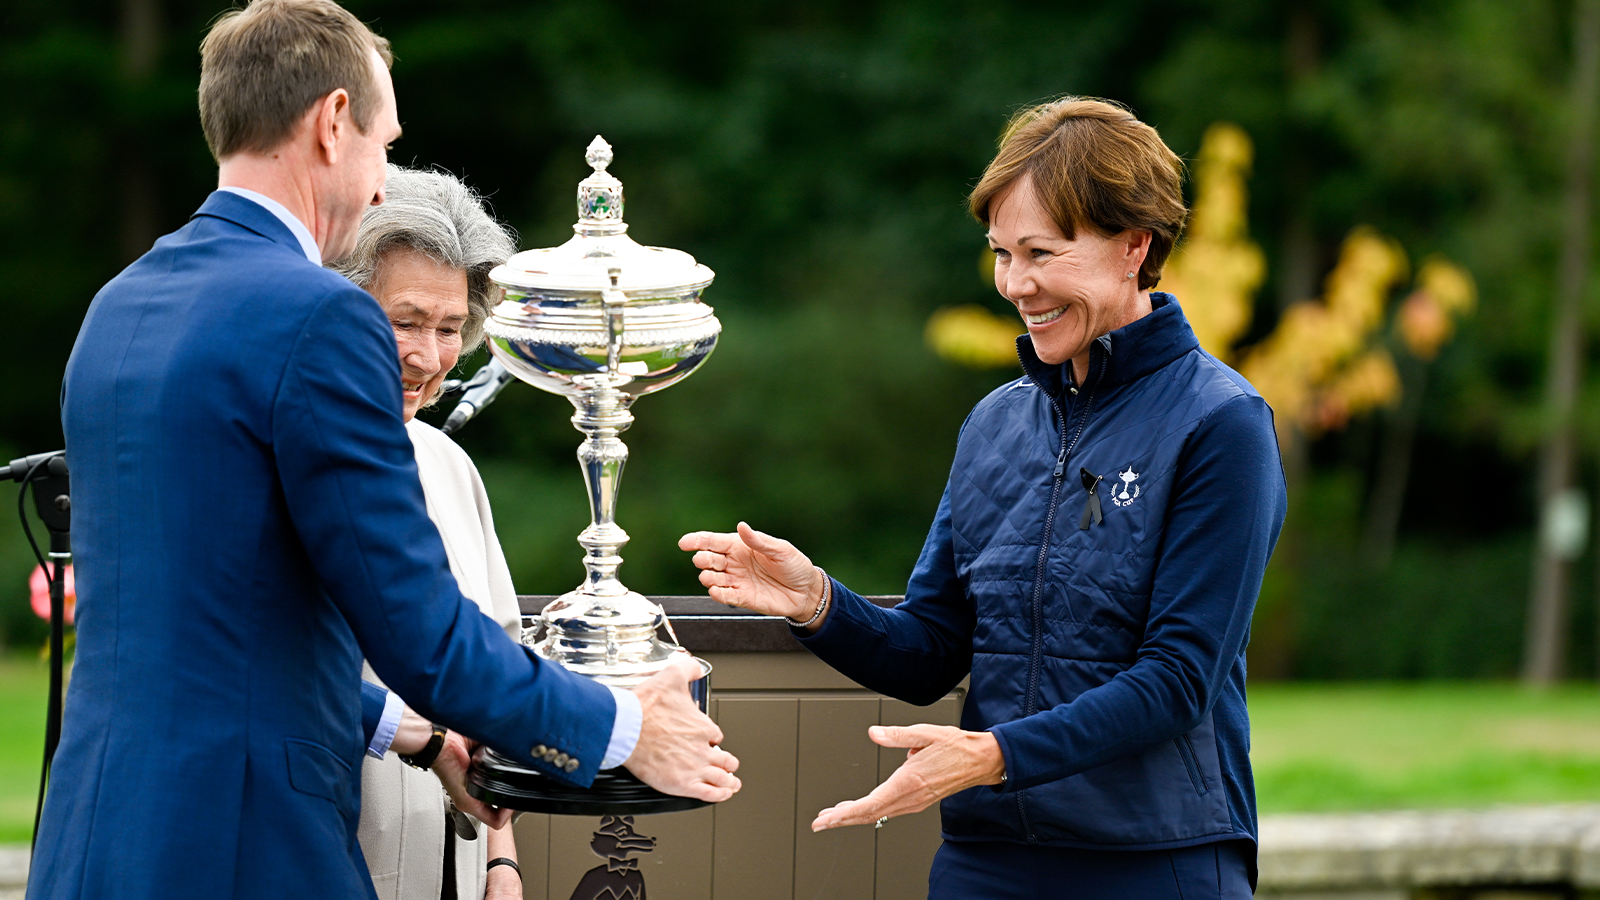 Captain and PGA of America Honorary President, Suzy Whaley receives the Llandudno trophy at the Closing Ceremonies after the 30th PGA Cup at Foxhills Golf Club on September 18, 2022 in Ottershaw, England. (Photo by Matthew Harris/PGA of America)